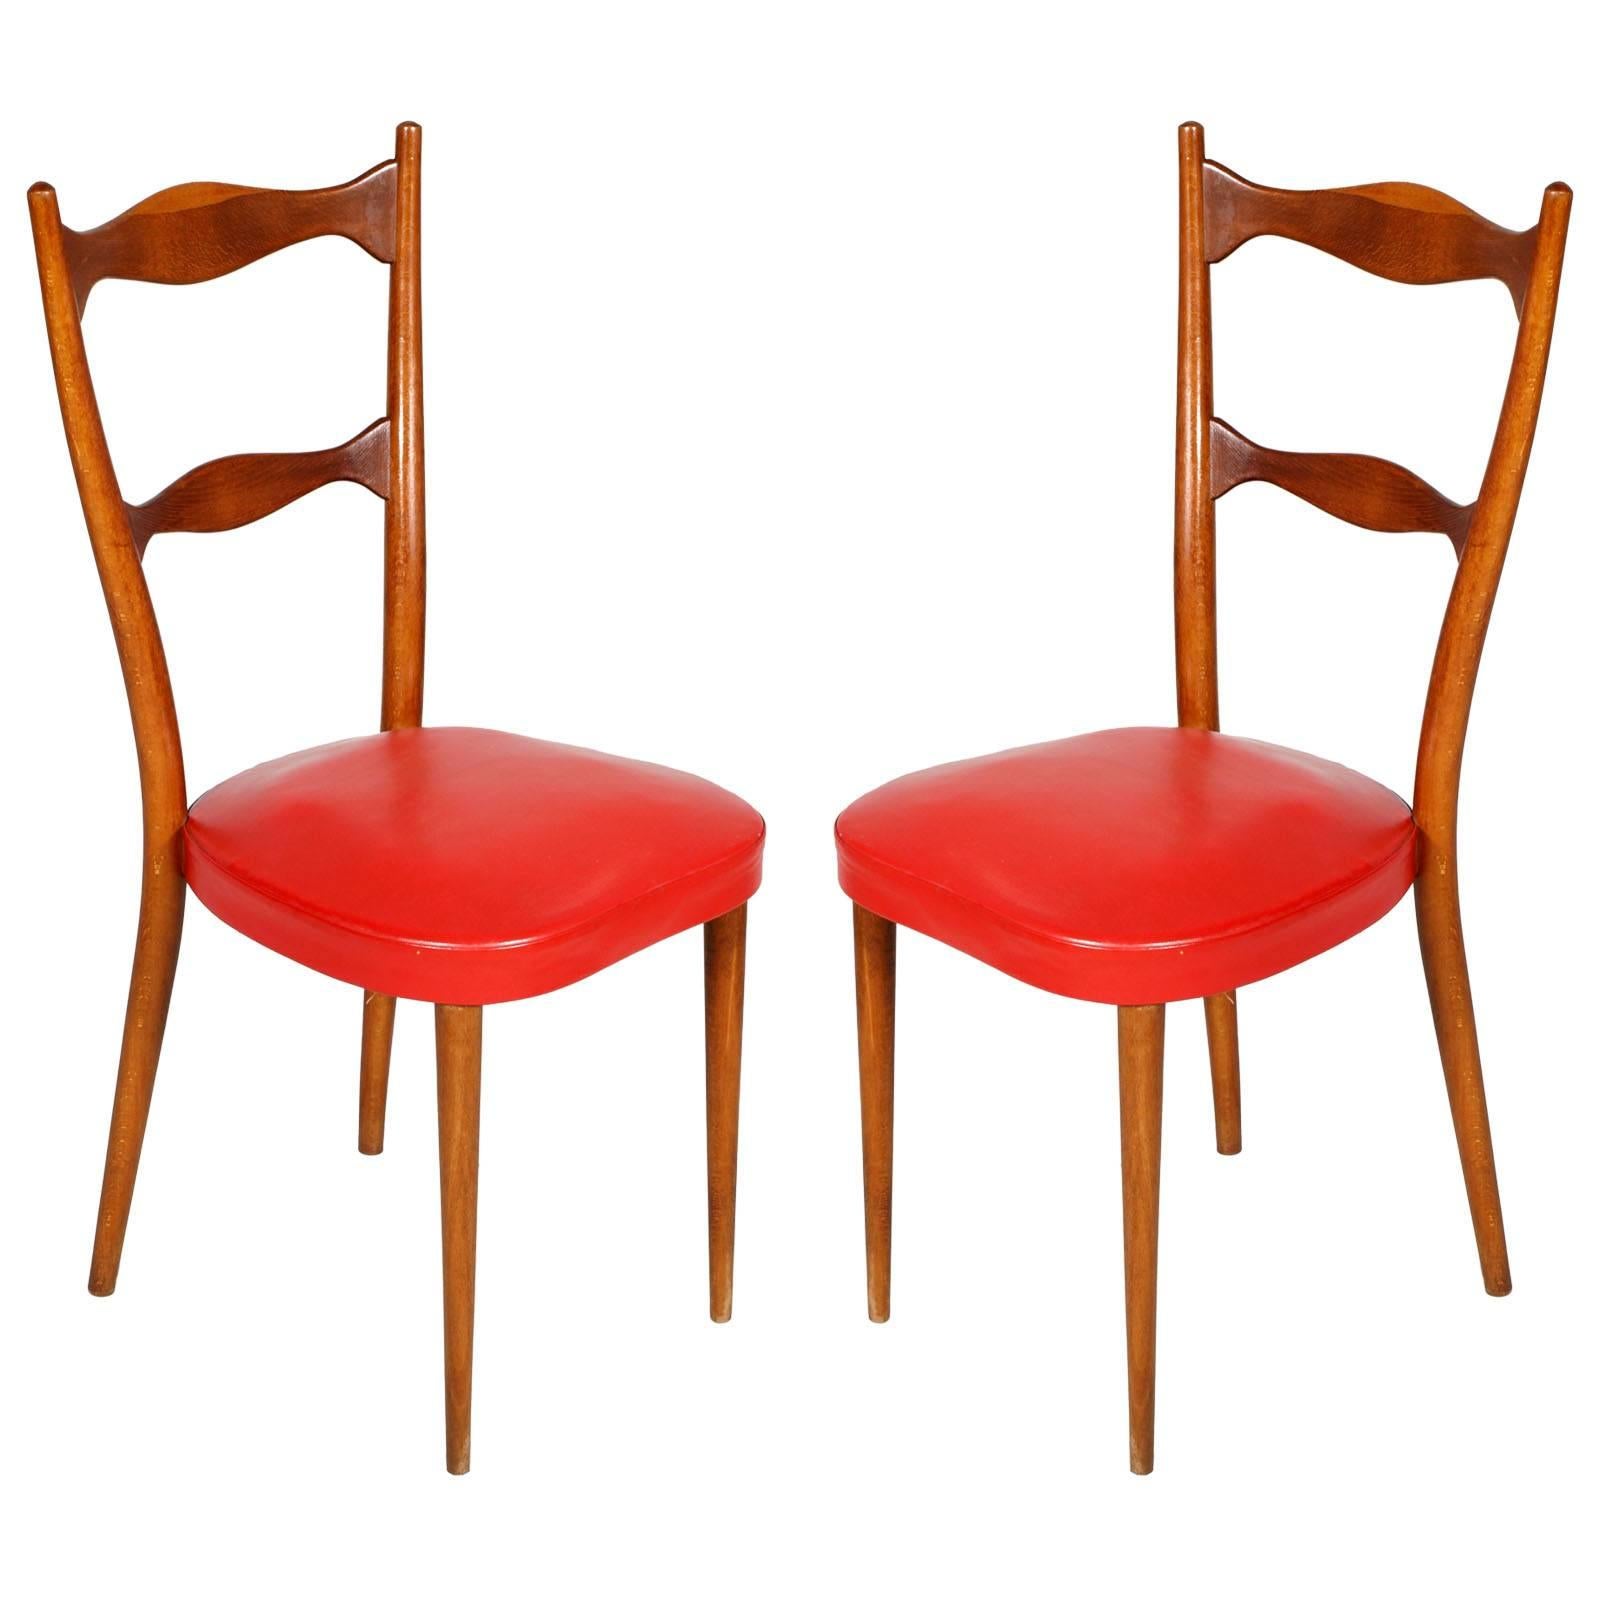 1940s Side Chairs by Melchiorre Bega with Spring Seat, leather upholstery